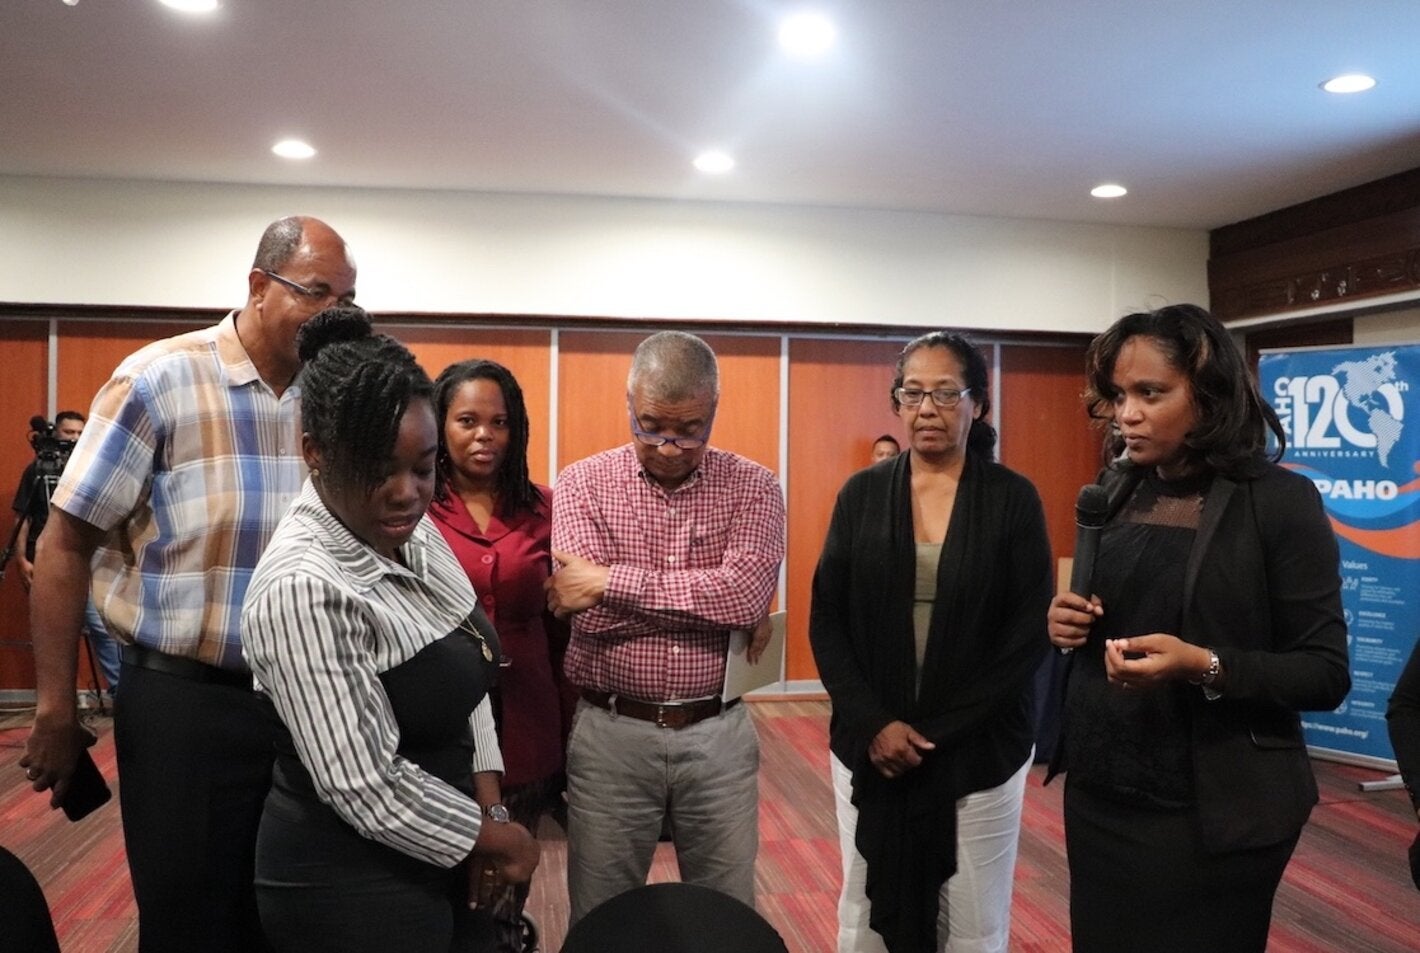 PAHO/WHO Suriname Technical Officer Dr. Wendy Emanuelson-Telgt engaging with several participants during the 2-day workshop